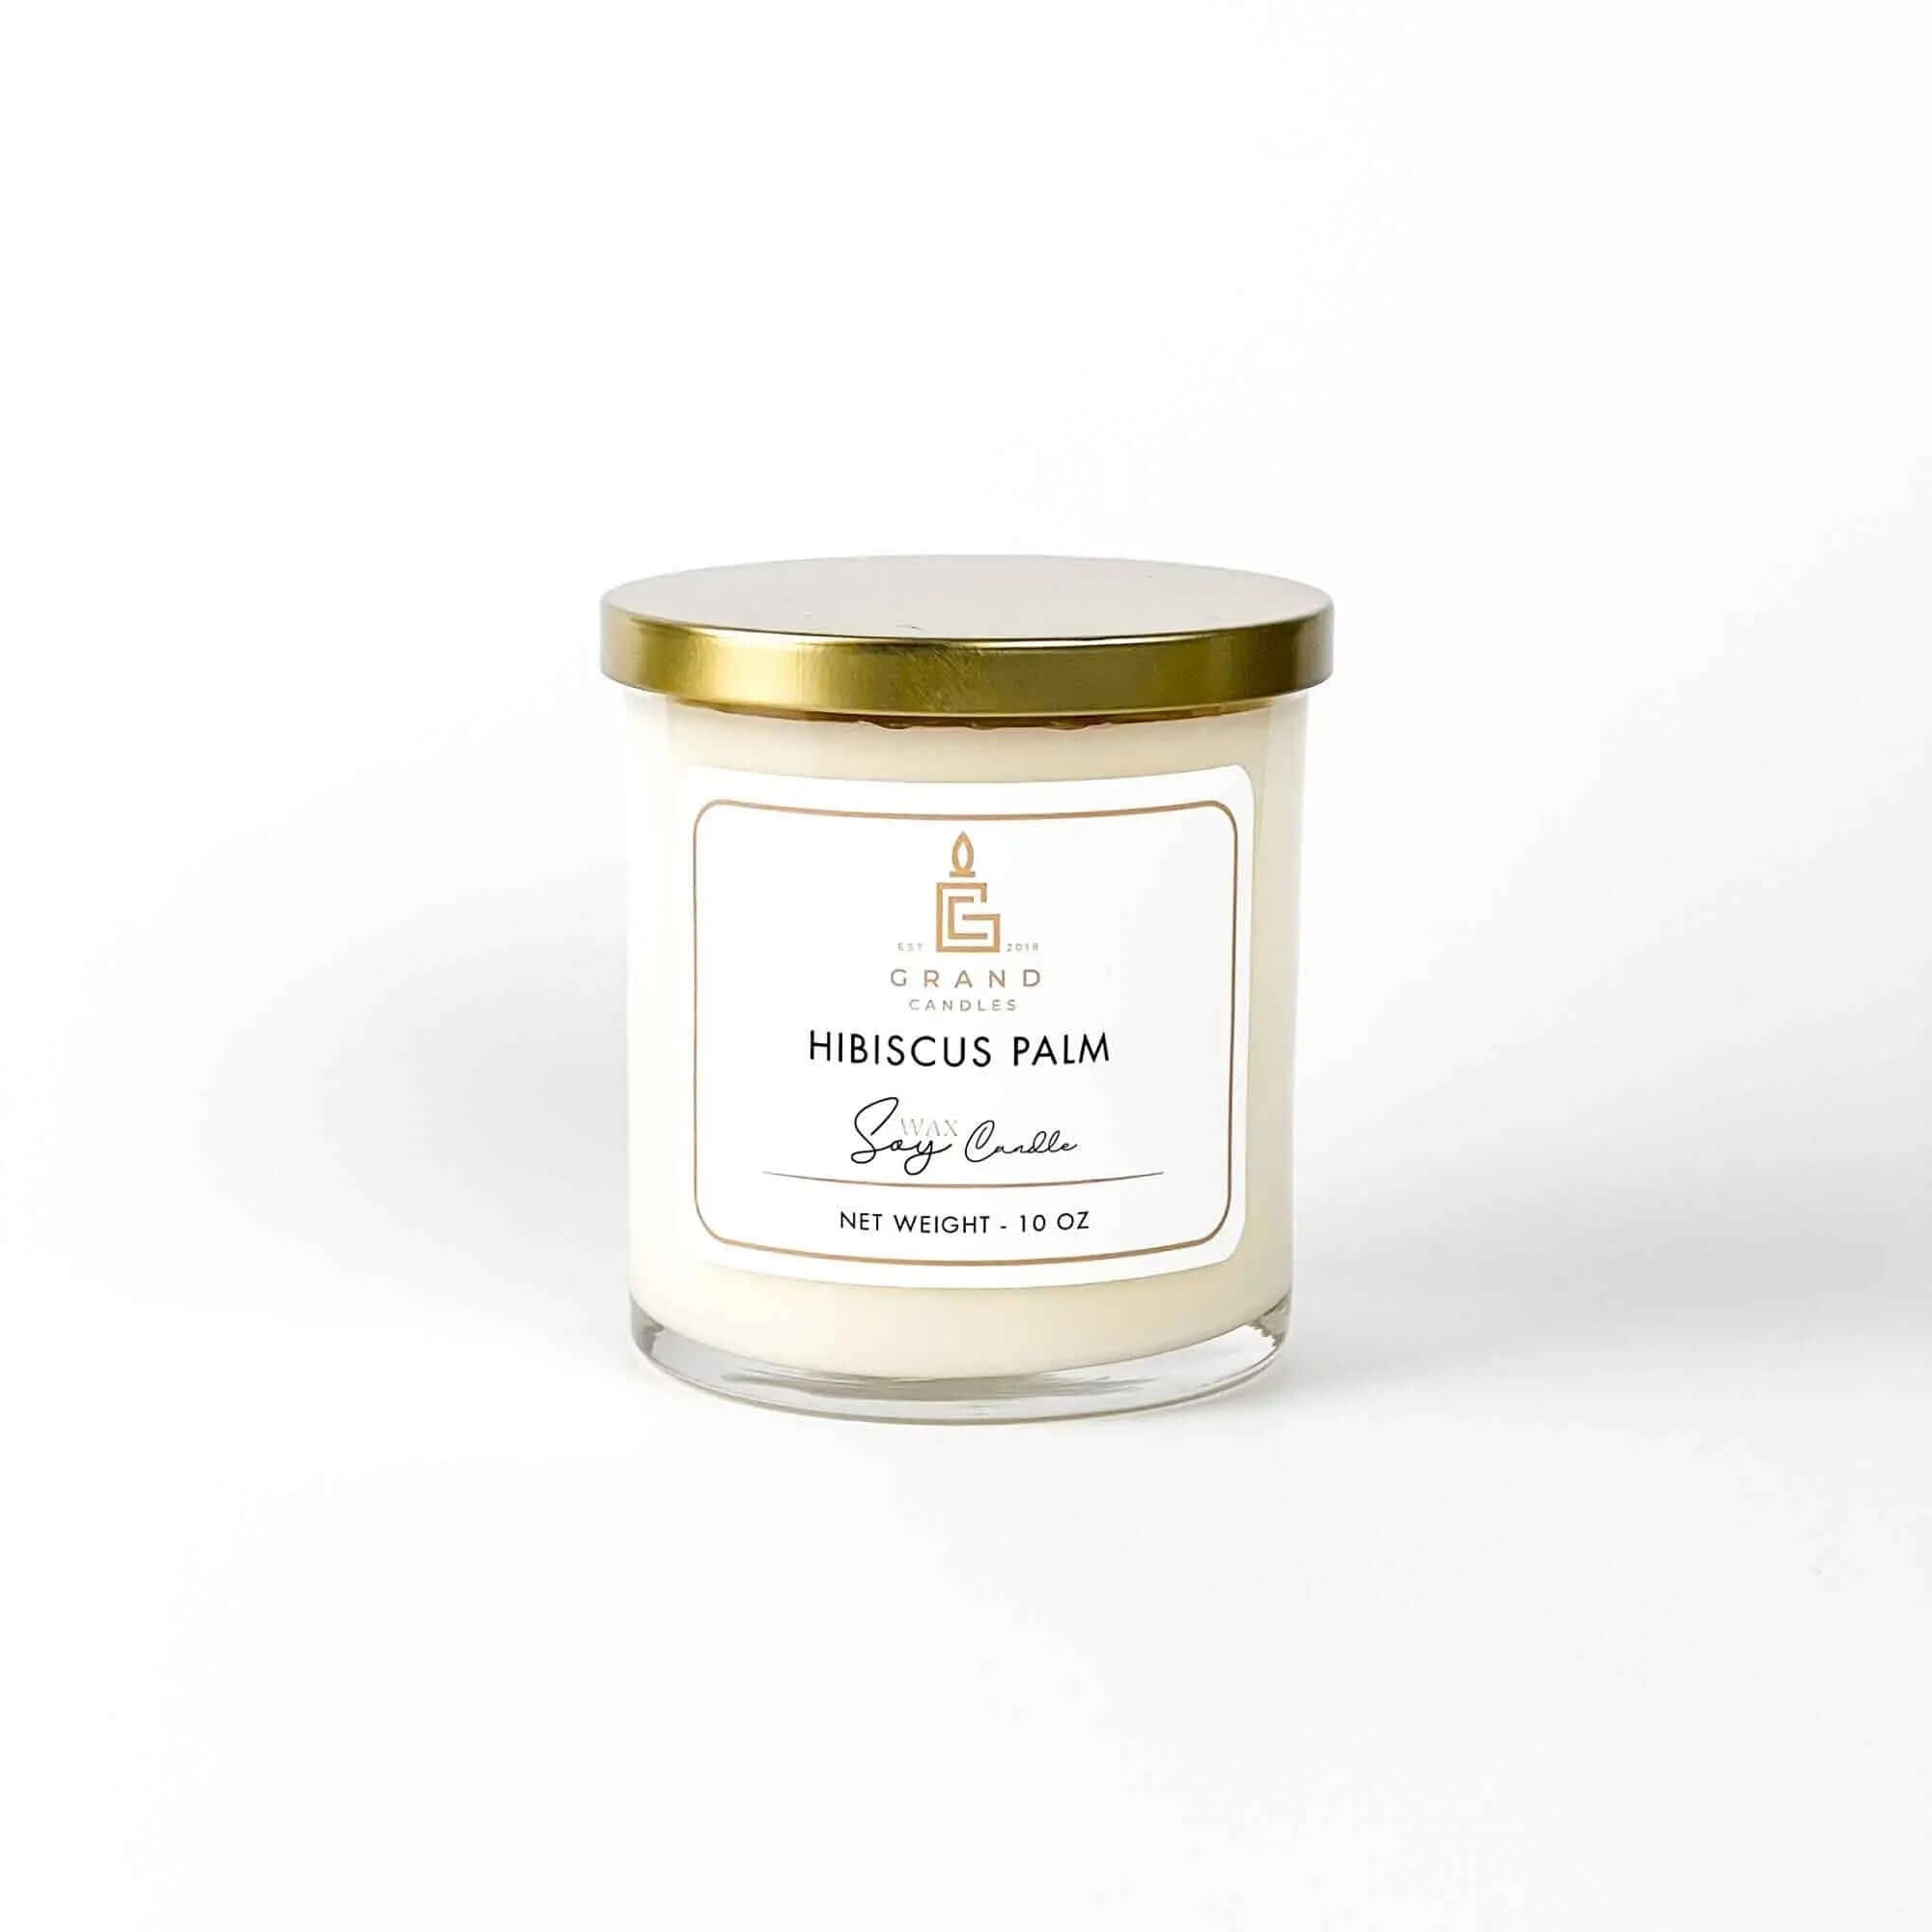 Soy Candle | Hibiscus Palm Scented Soy Candle | All-Natural Scent for Home Decor and Relaxation